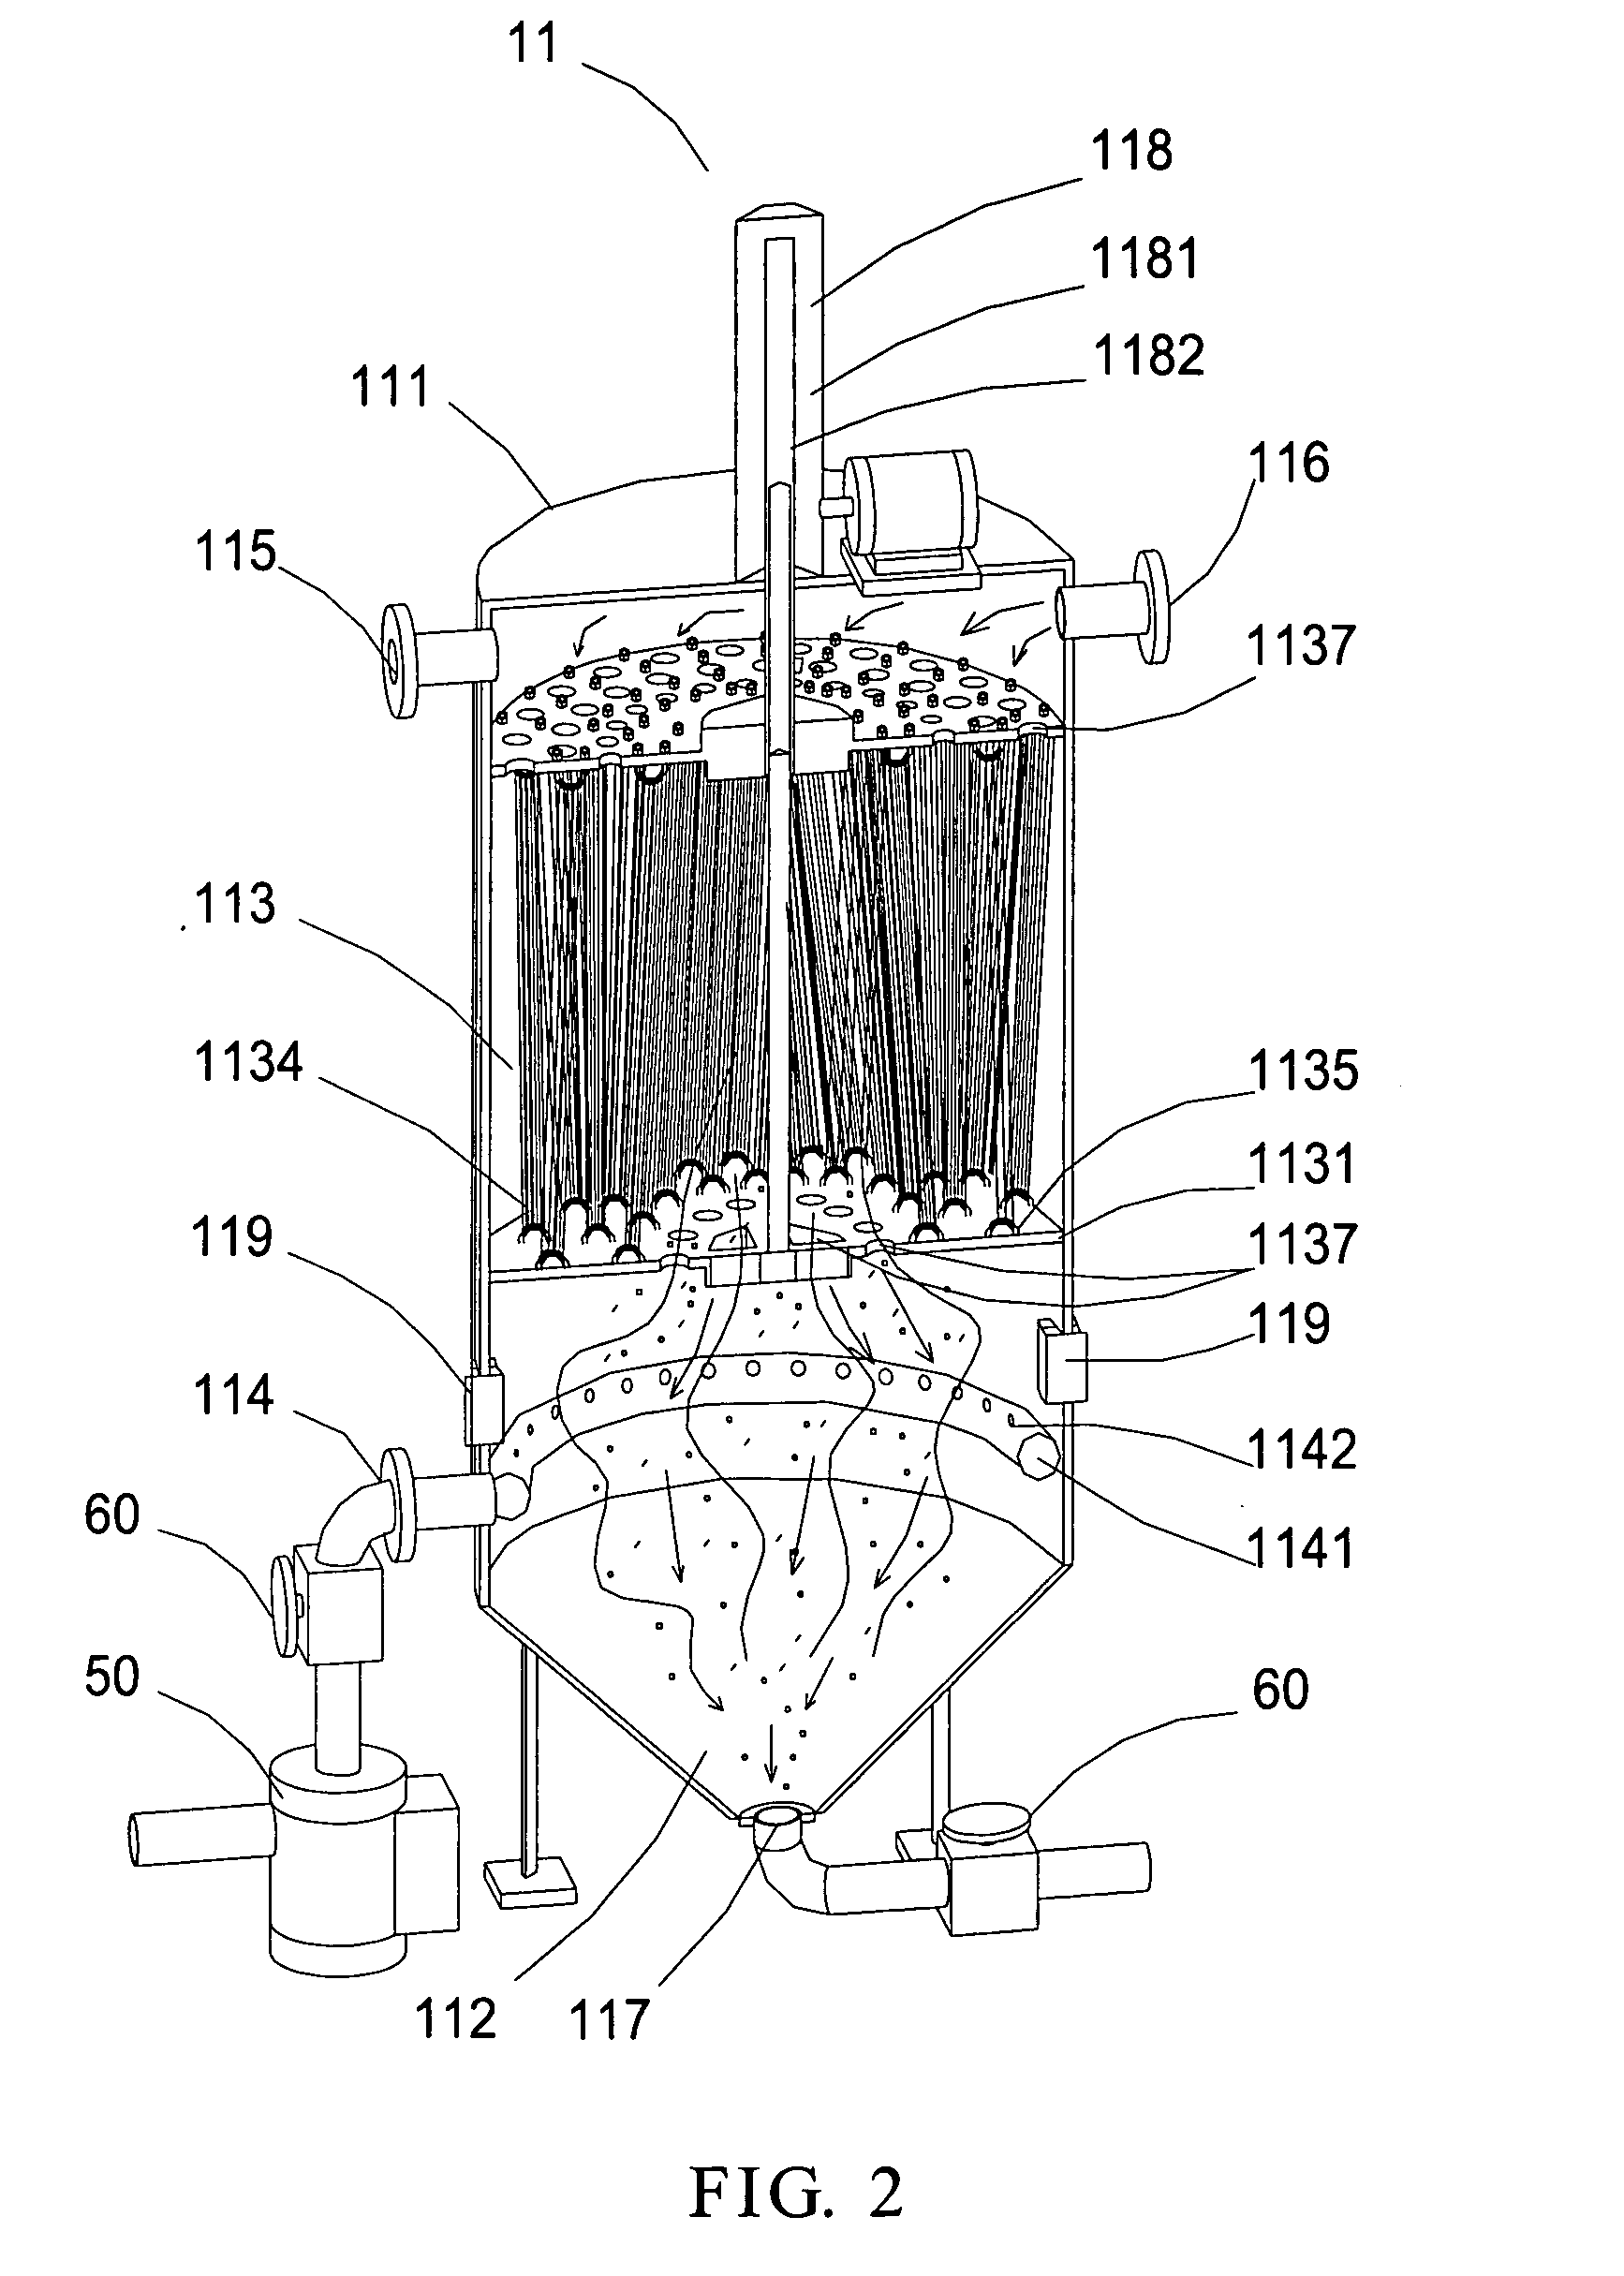 Water purification and treatment apparatus and treatment process using the apparatus